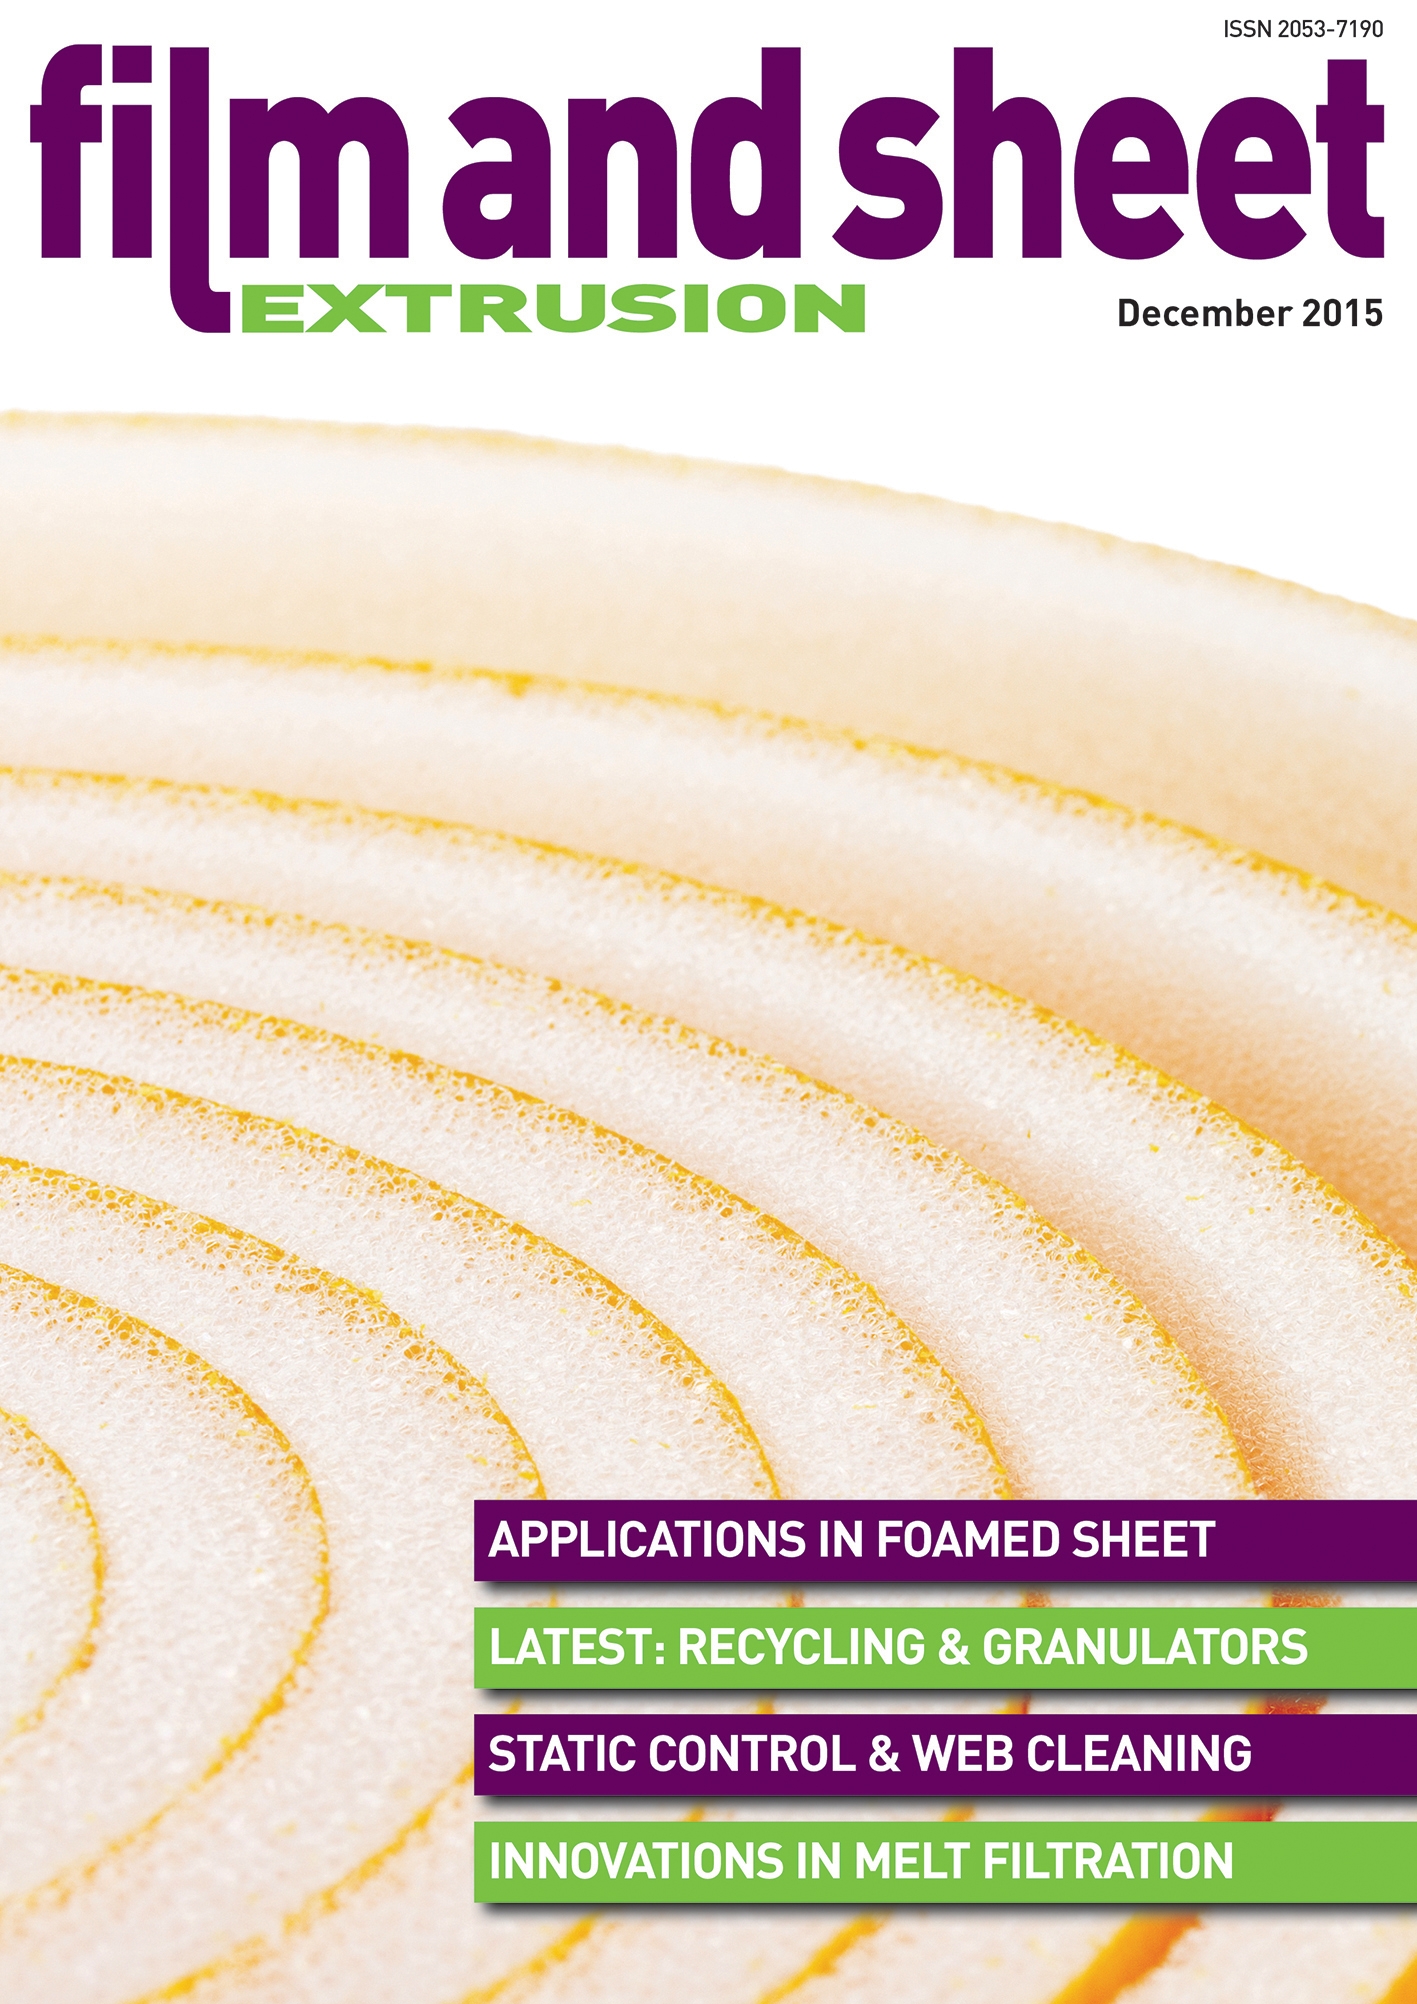 Film and Sheet Extrusion December 2015